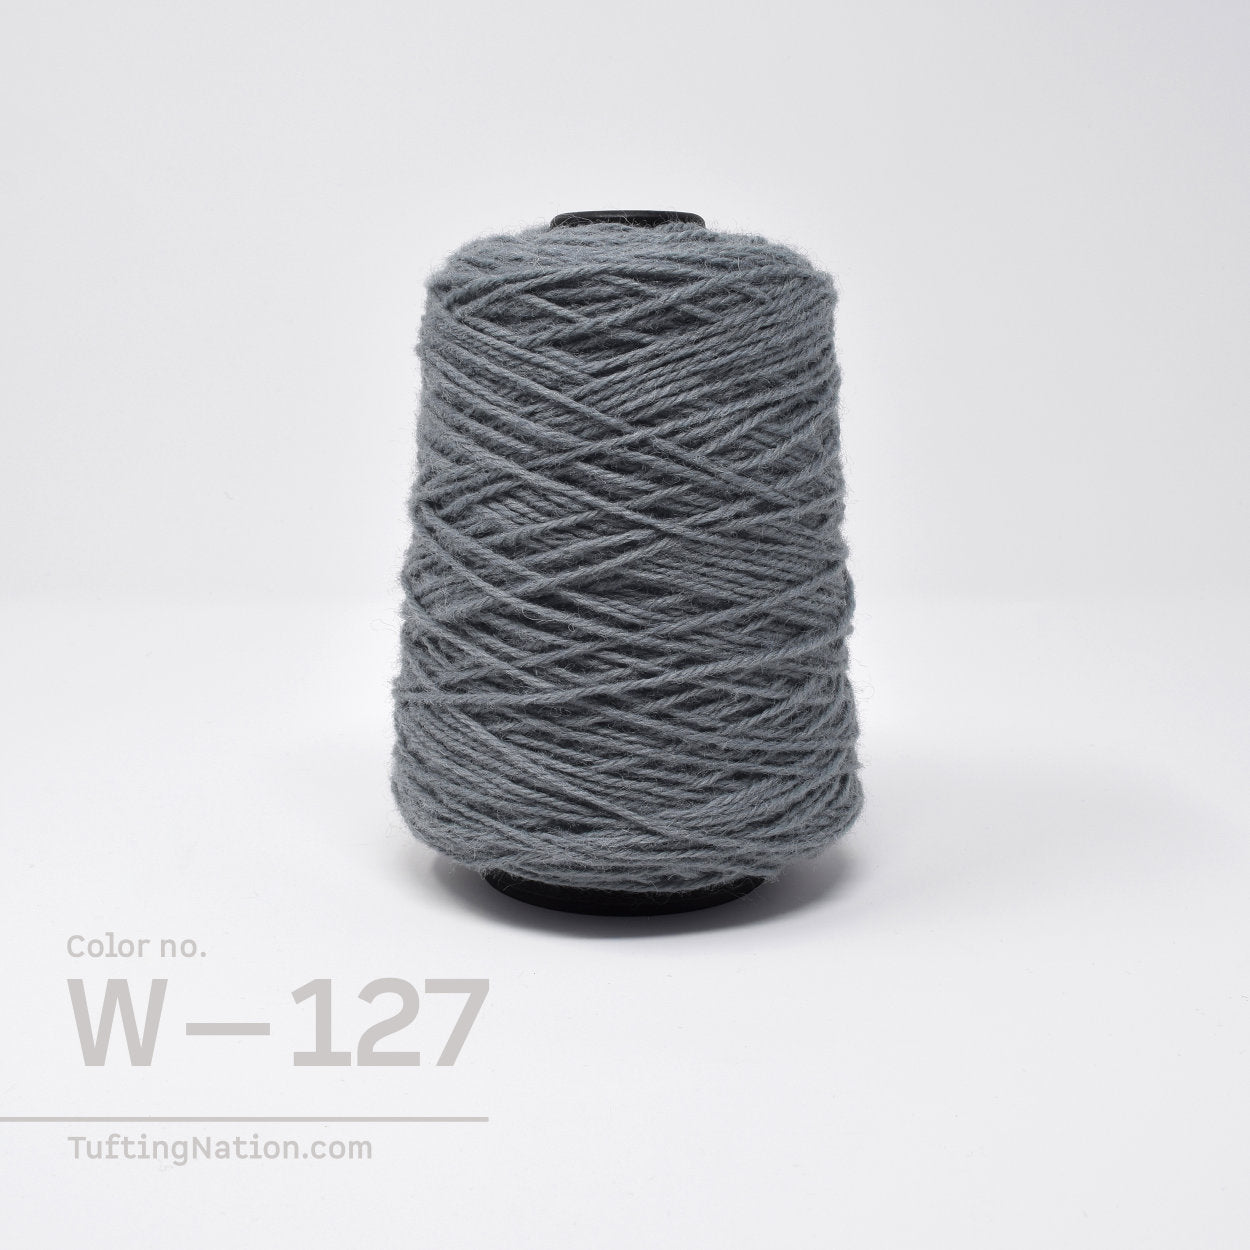 Cold Gray Wool Yarn on 0.5 pounds for Rug Tufting Gun | TuftingNation